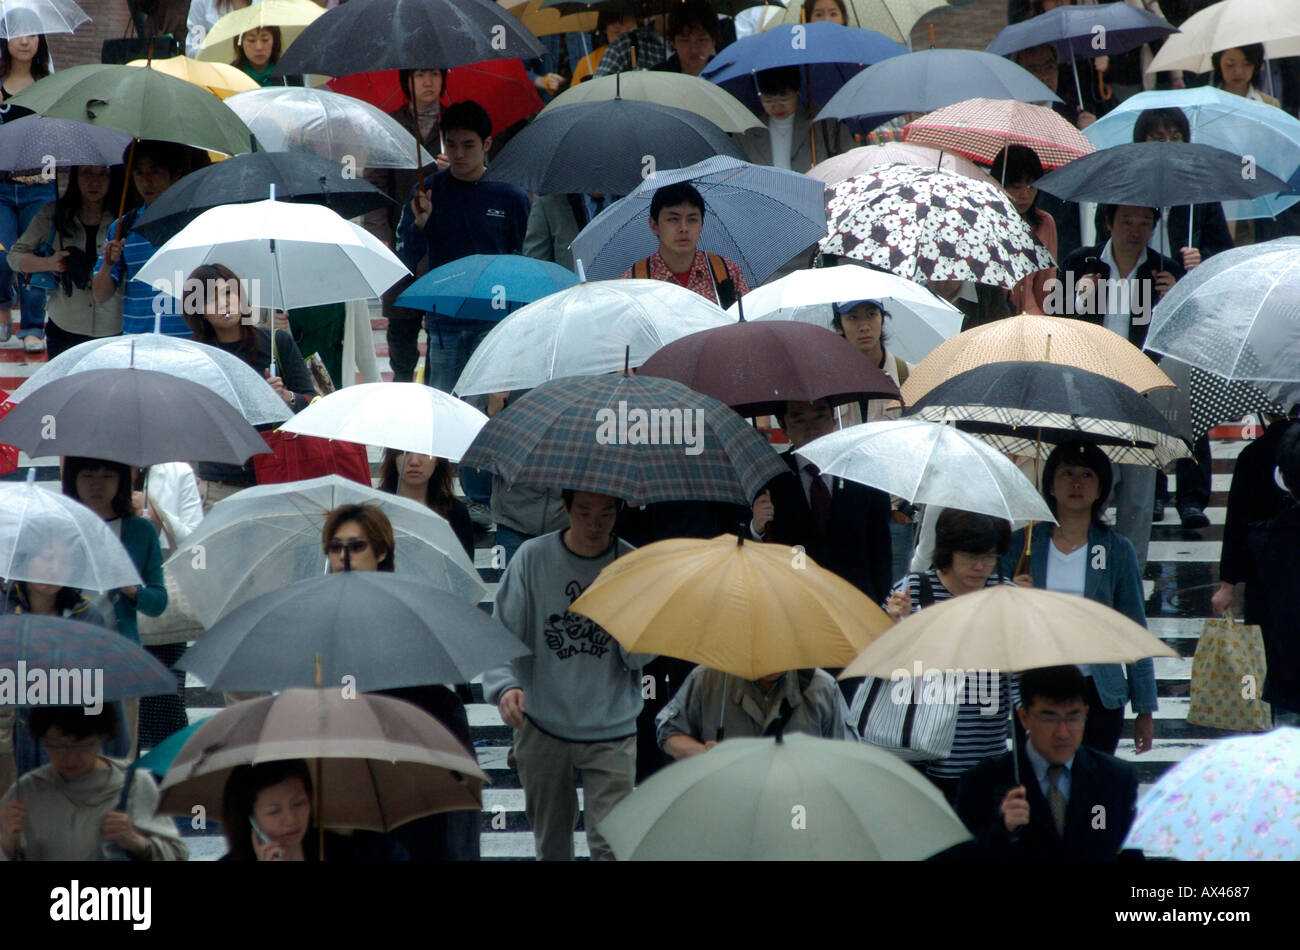 Crowds of workers make their way to work in the rain in Shibuya Tokyo Japan Stock Photo